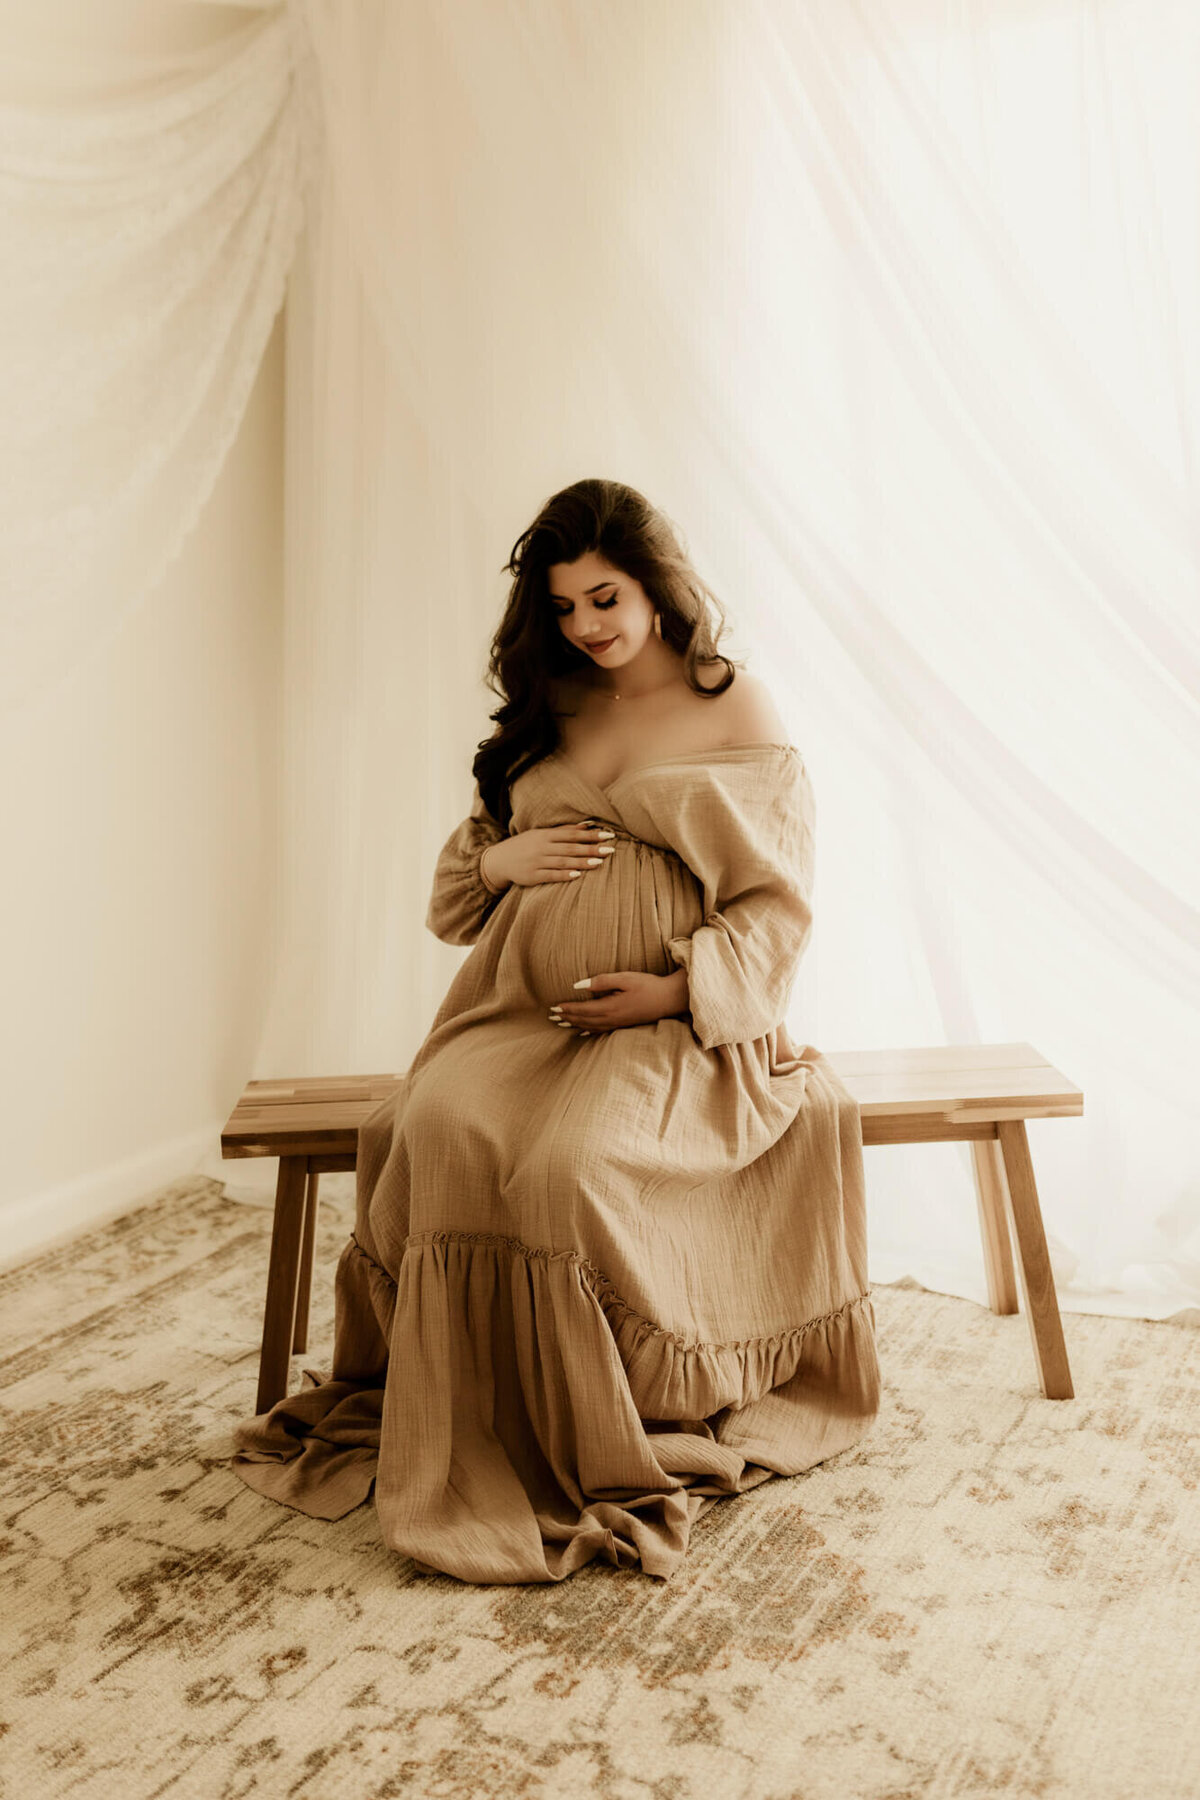 Expecting mother sitting on a bench while looking down at her  baby bump wearing an off-shoulder beige dress.